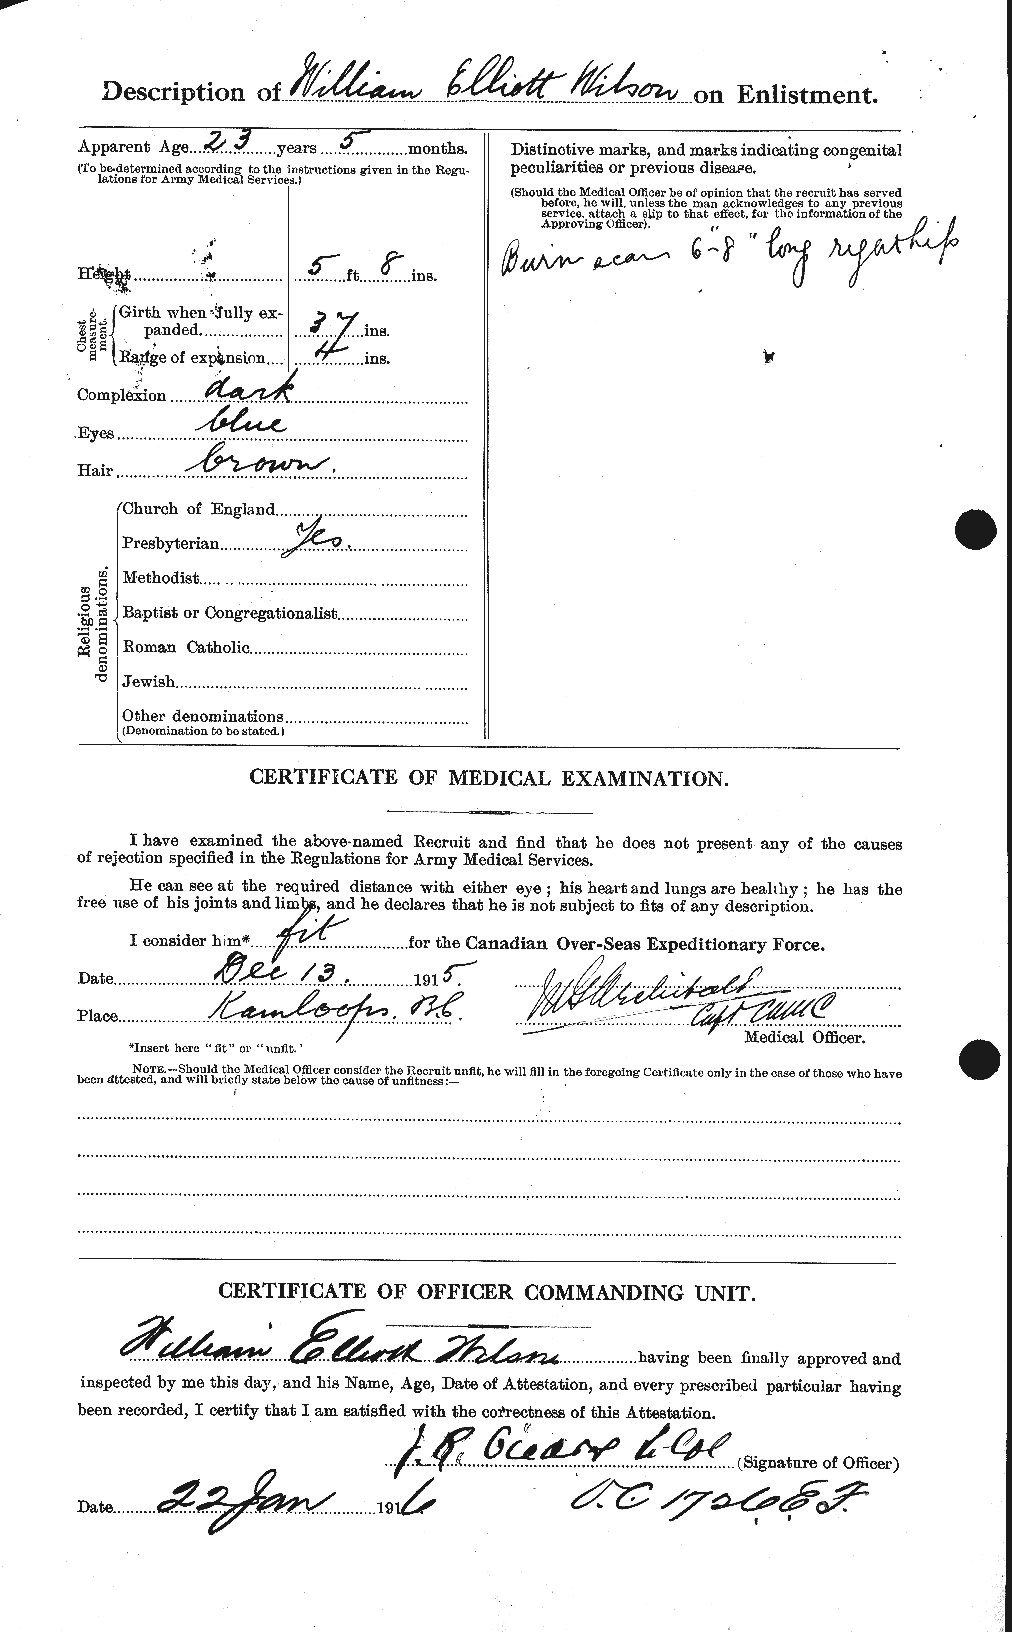 Personnel Records of the First World War - CEF 681979b